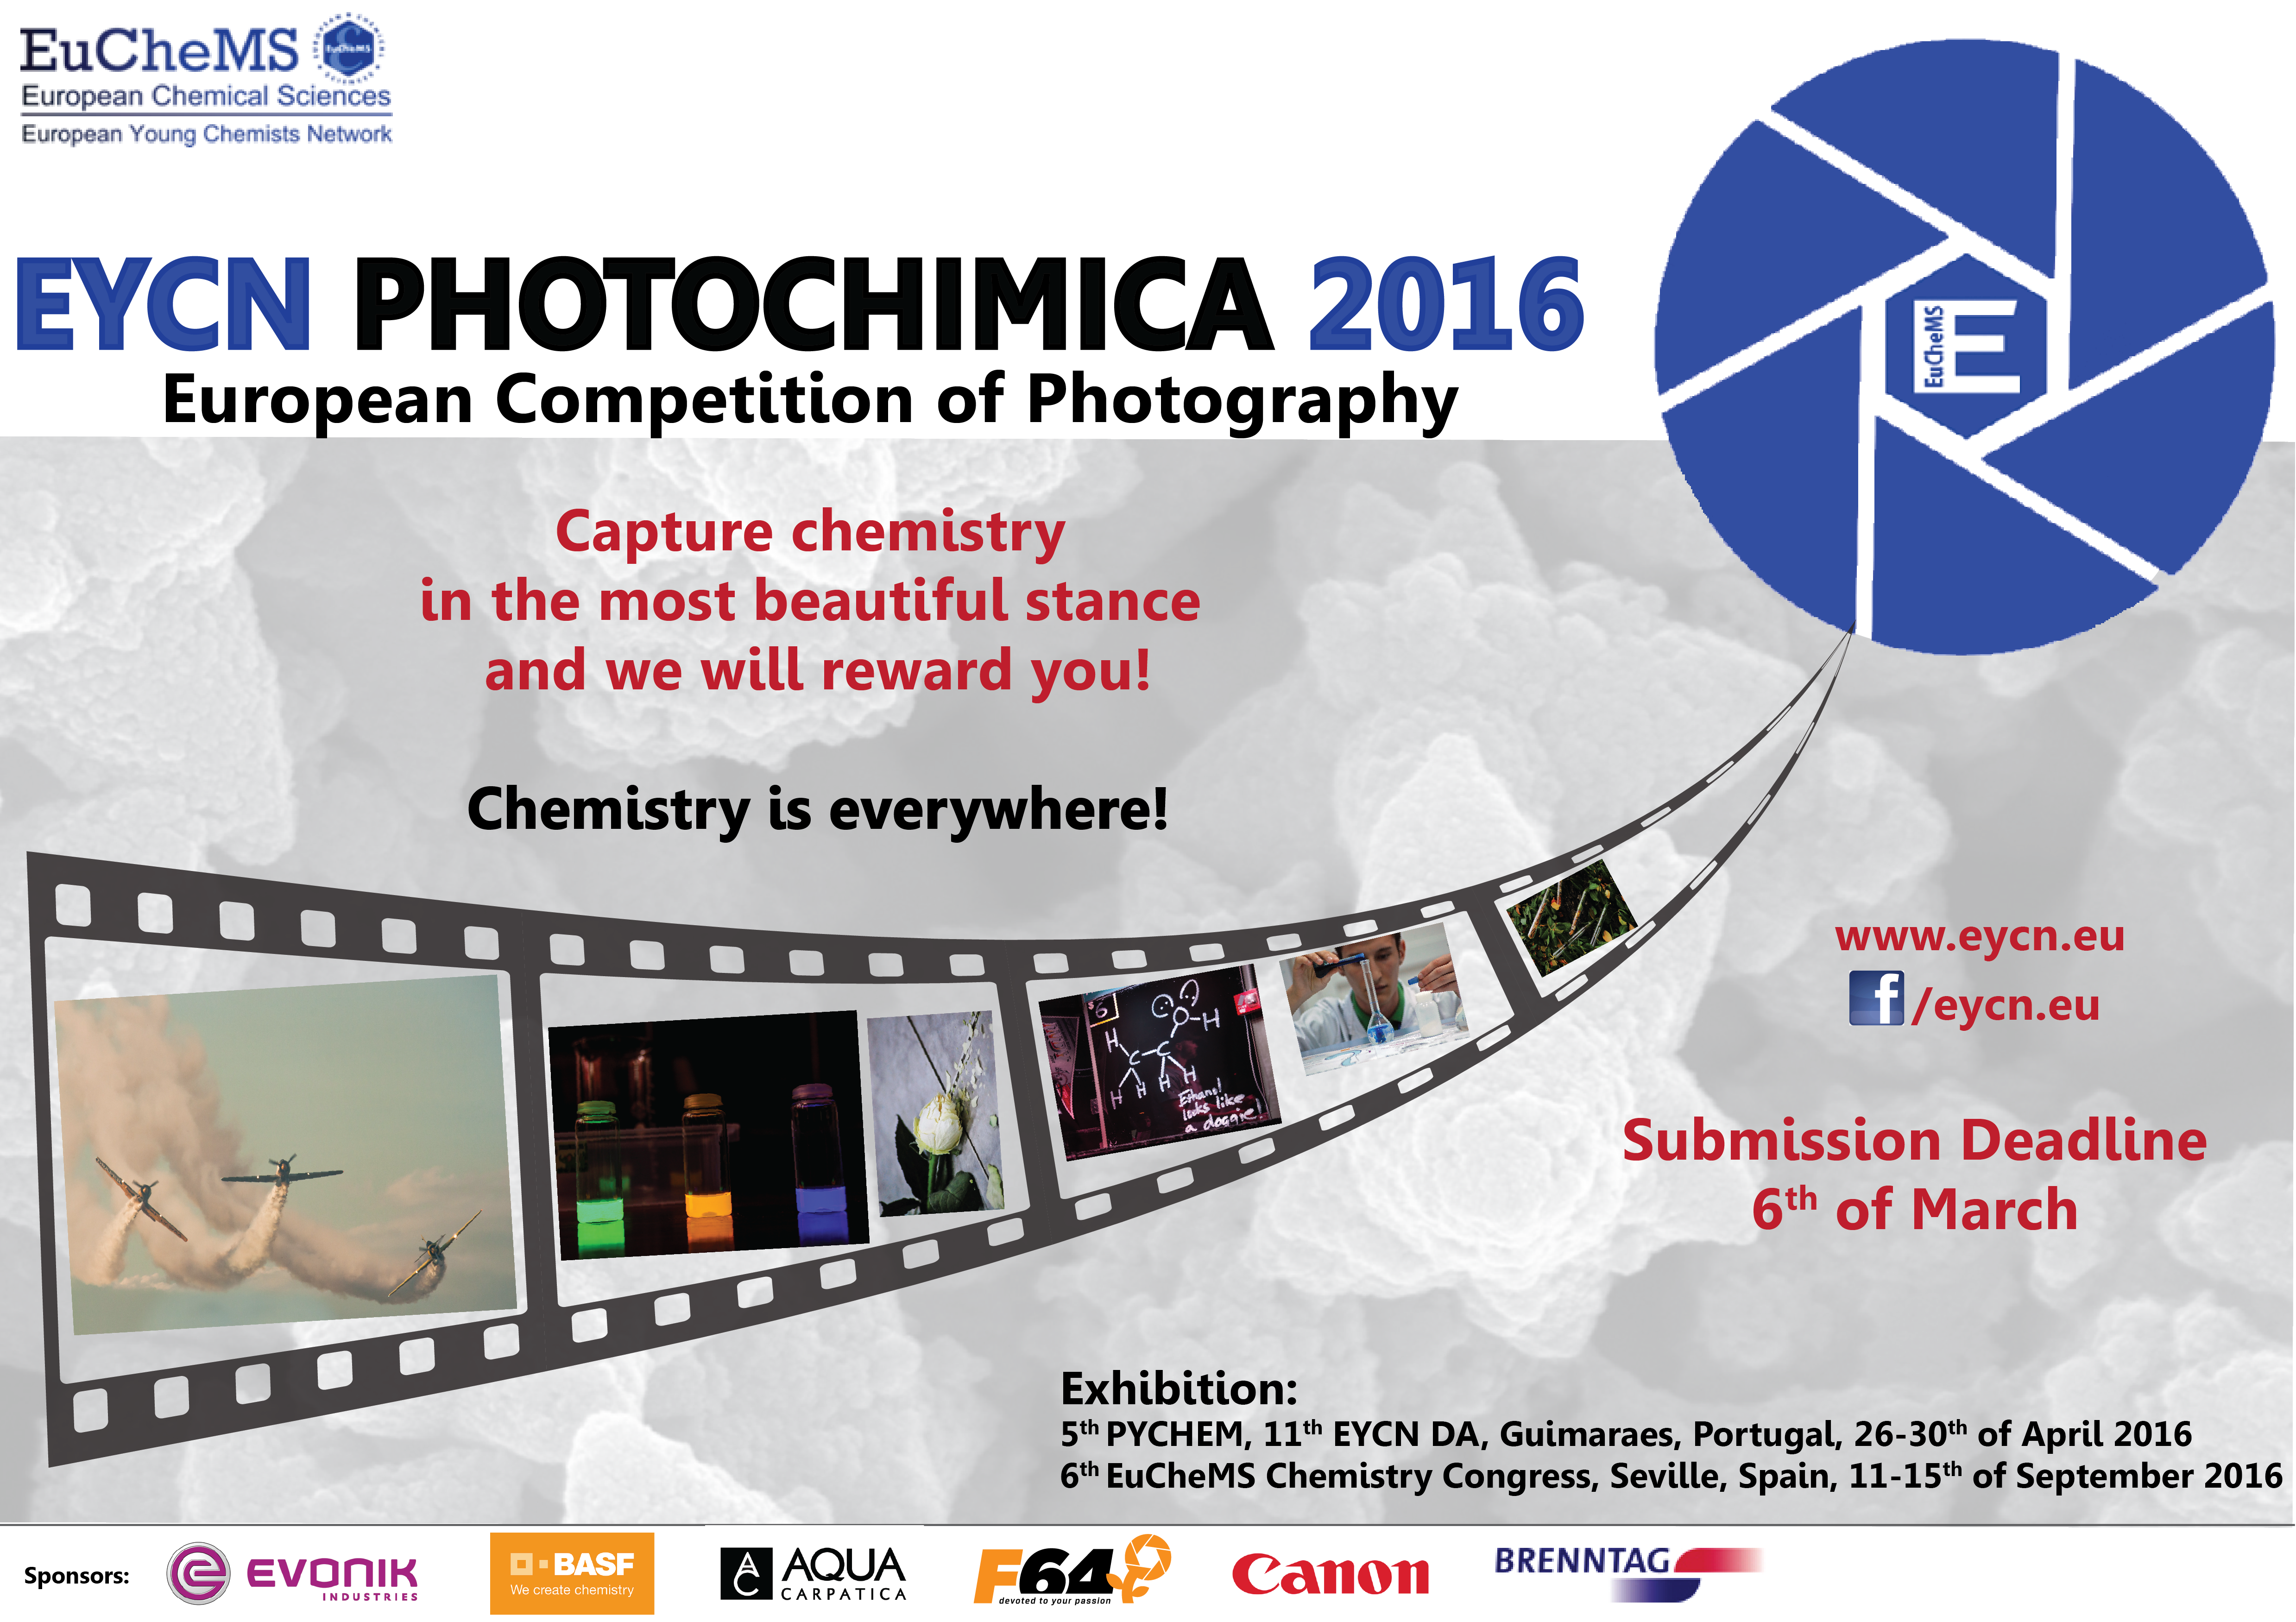 EYCN Photochimica Photo Competition